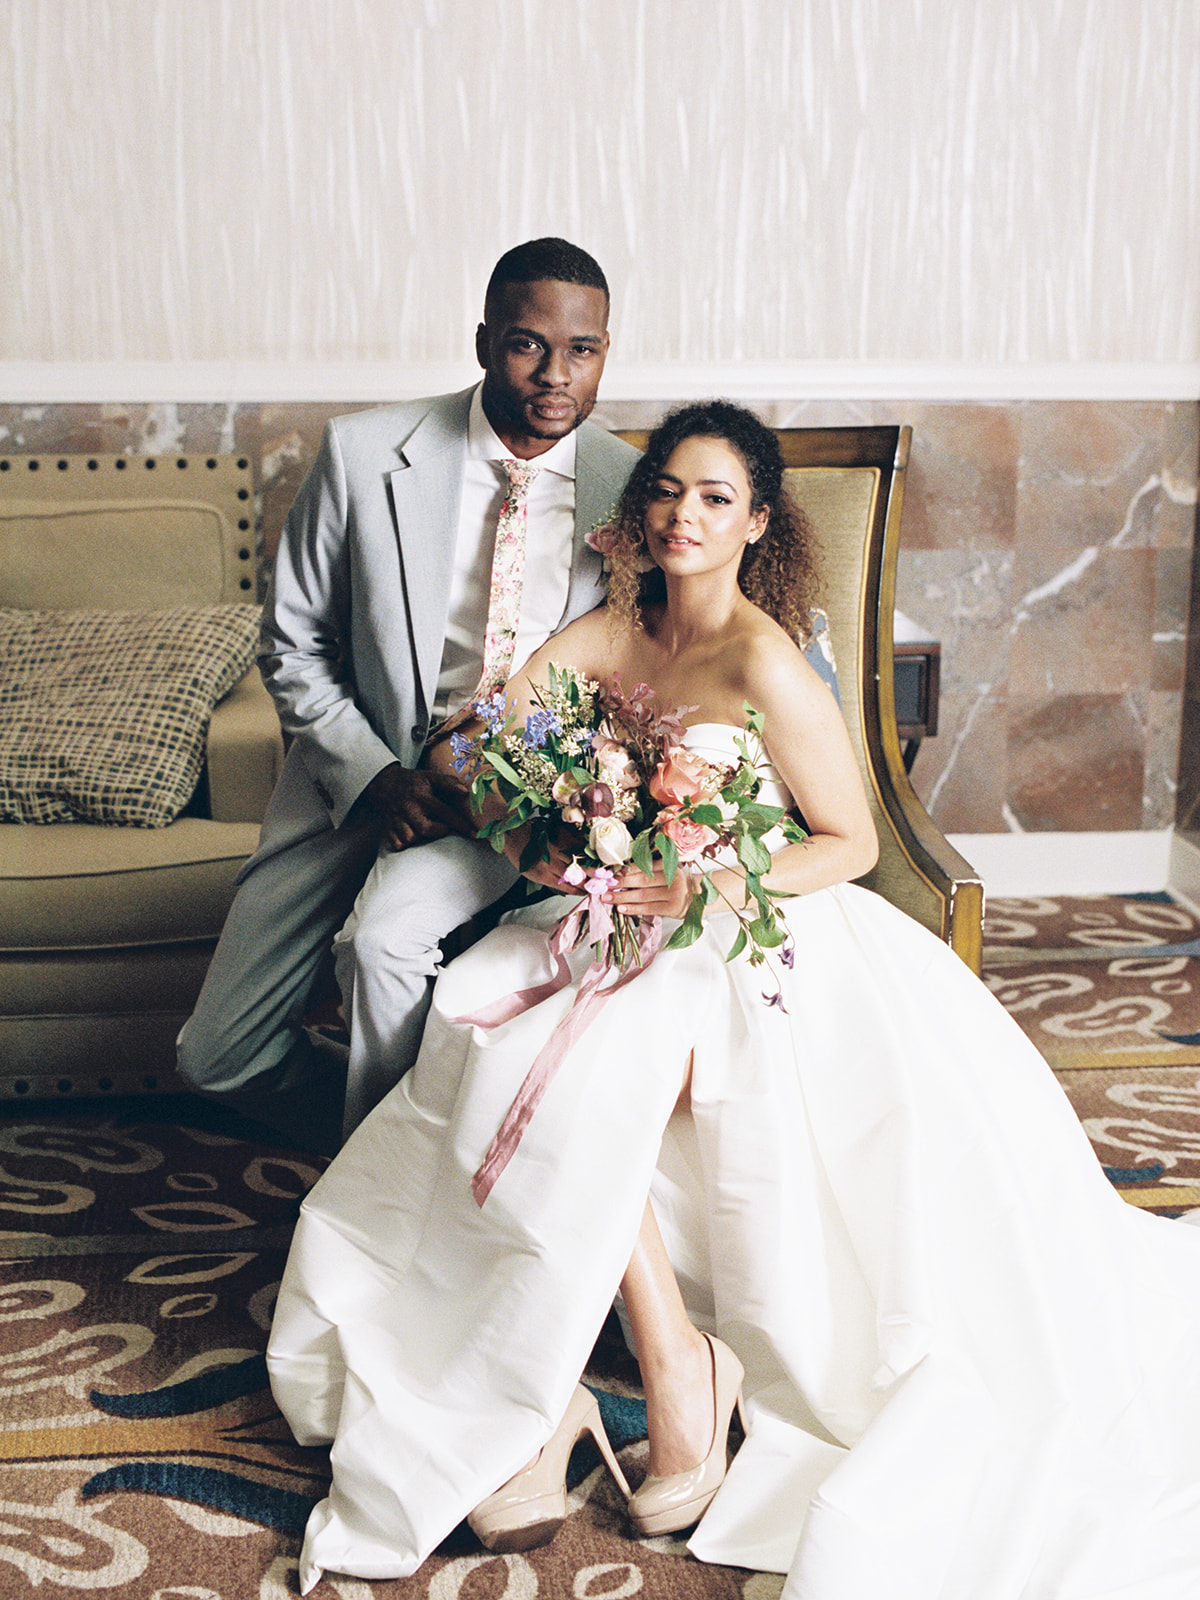 A stunning model couple pose at the Omni Resort in Amelia Island, Florida.